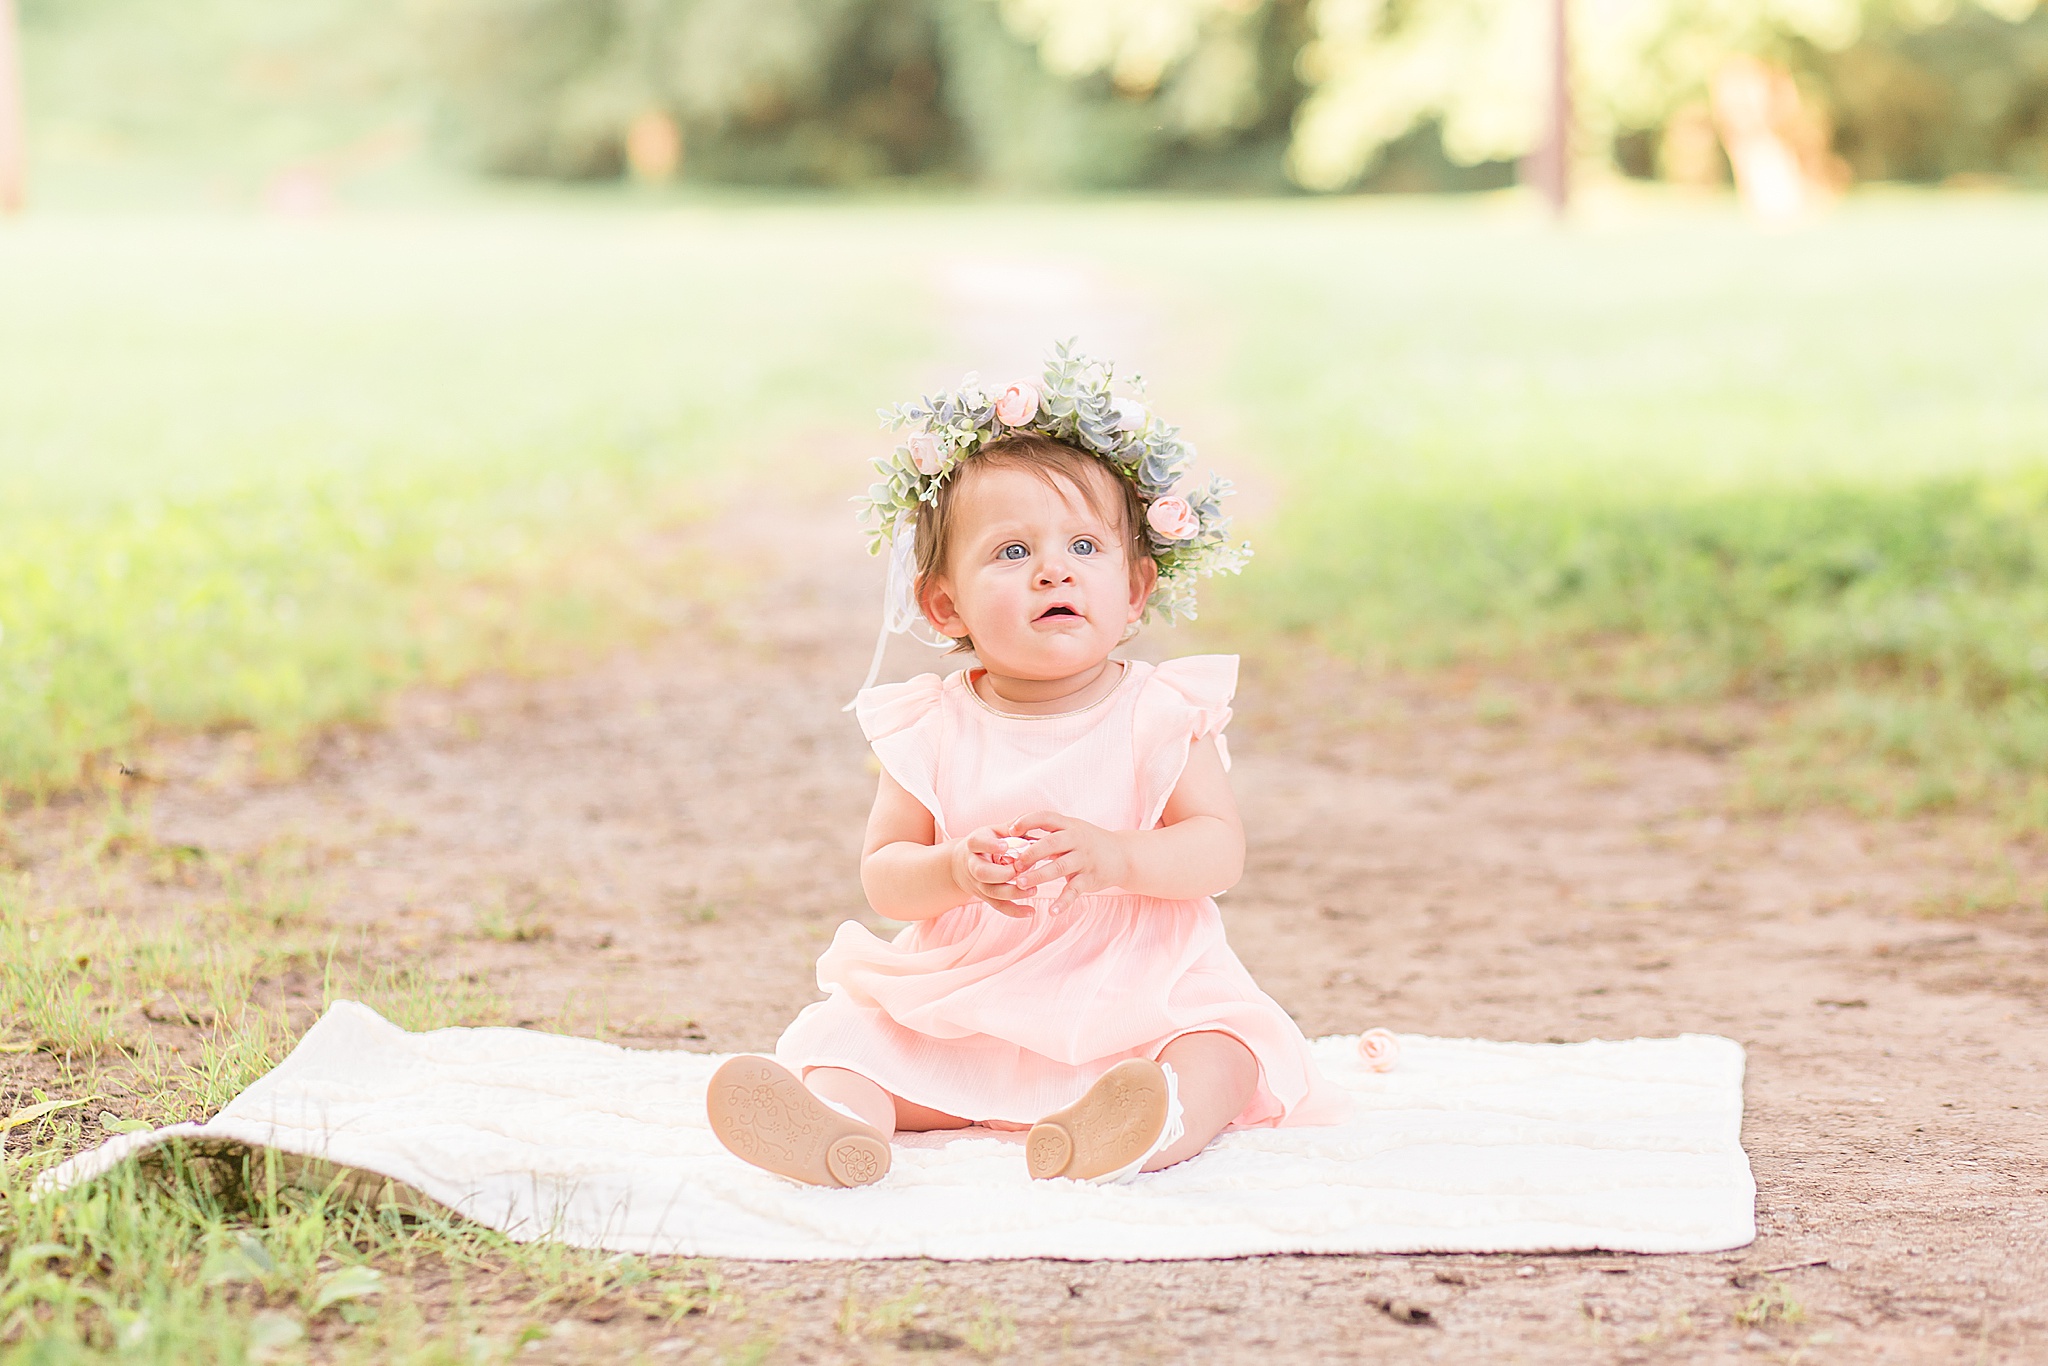 little girl in pink dress with flower crown poses in Pinkerton Park